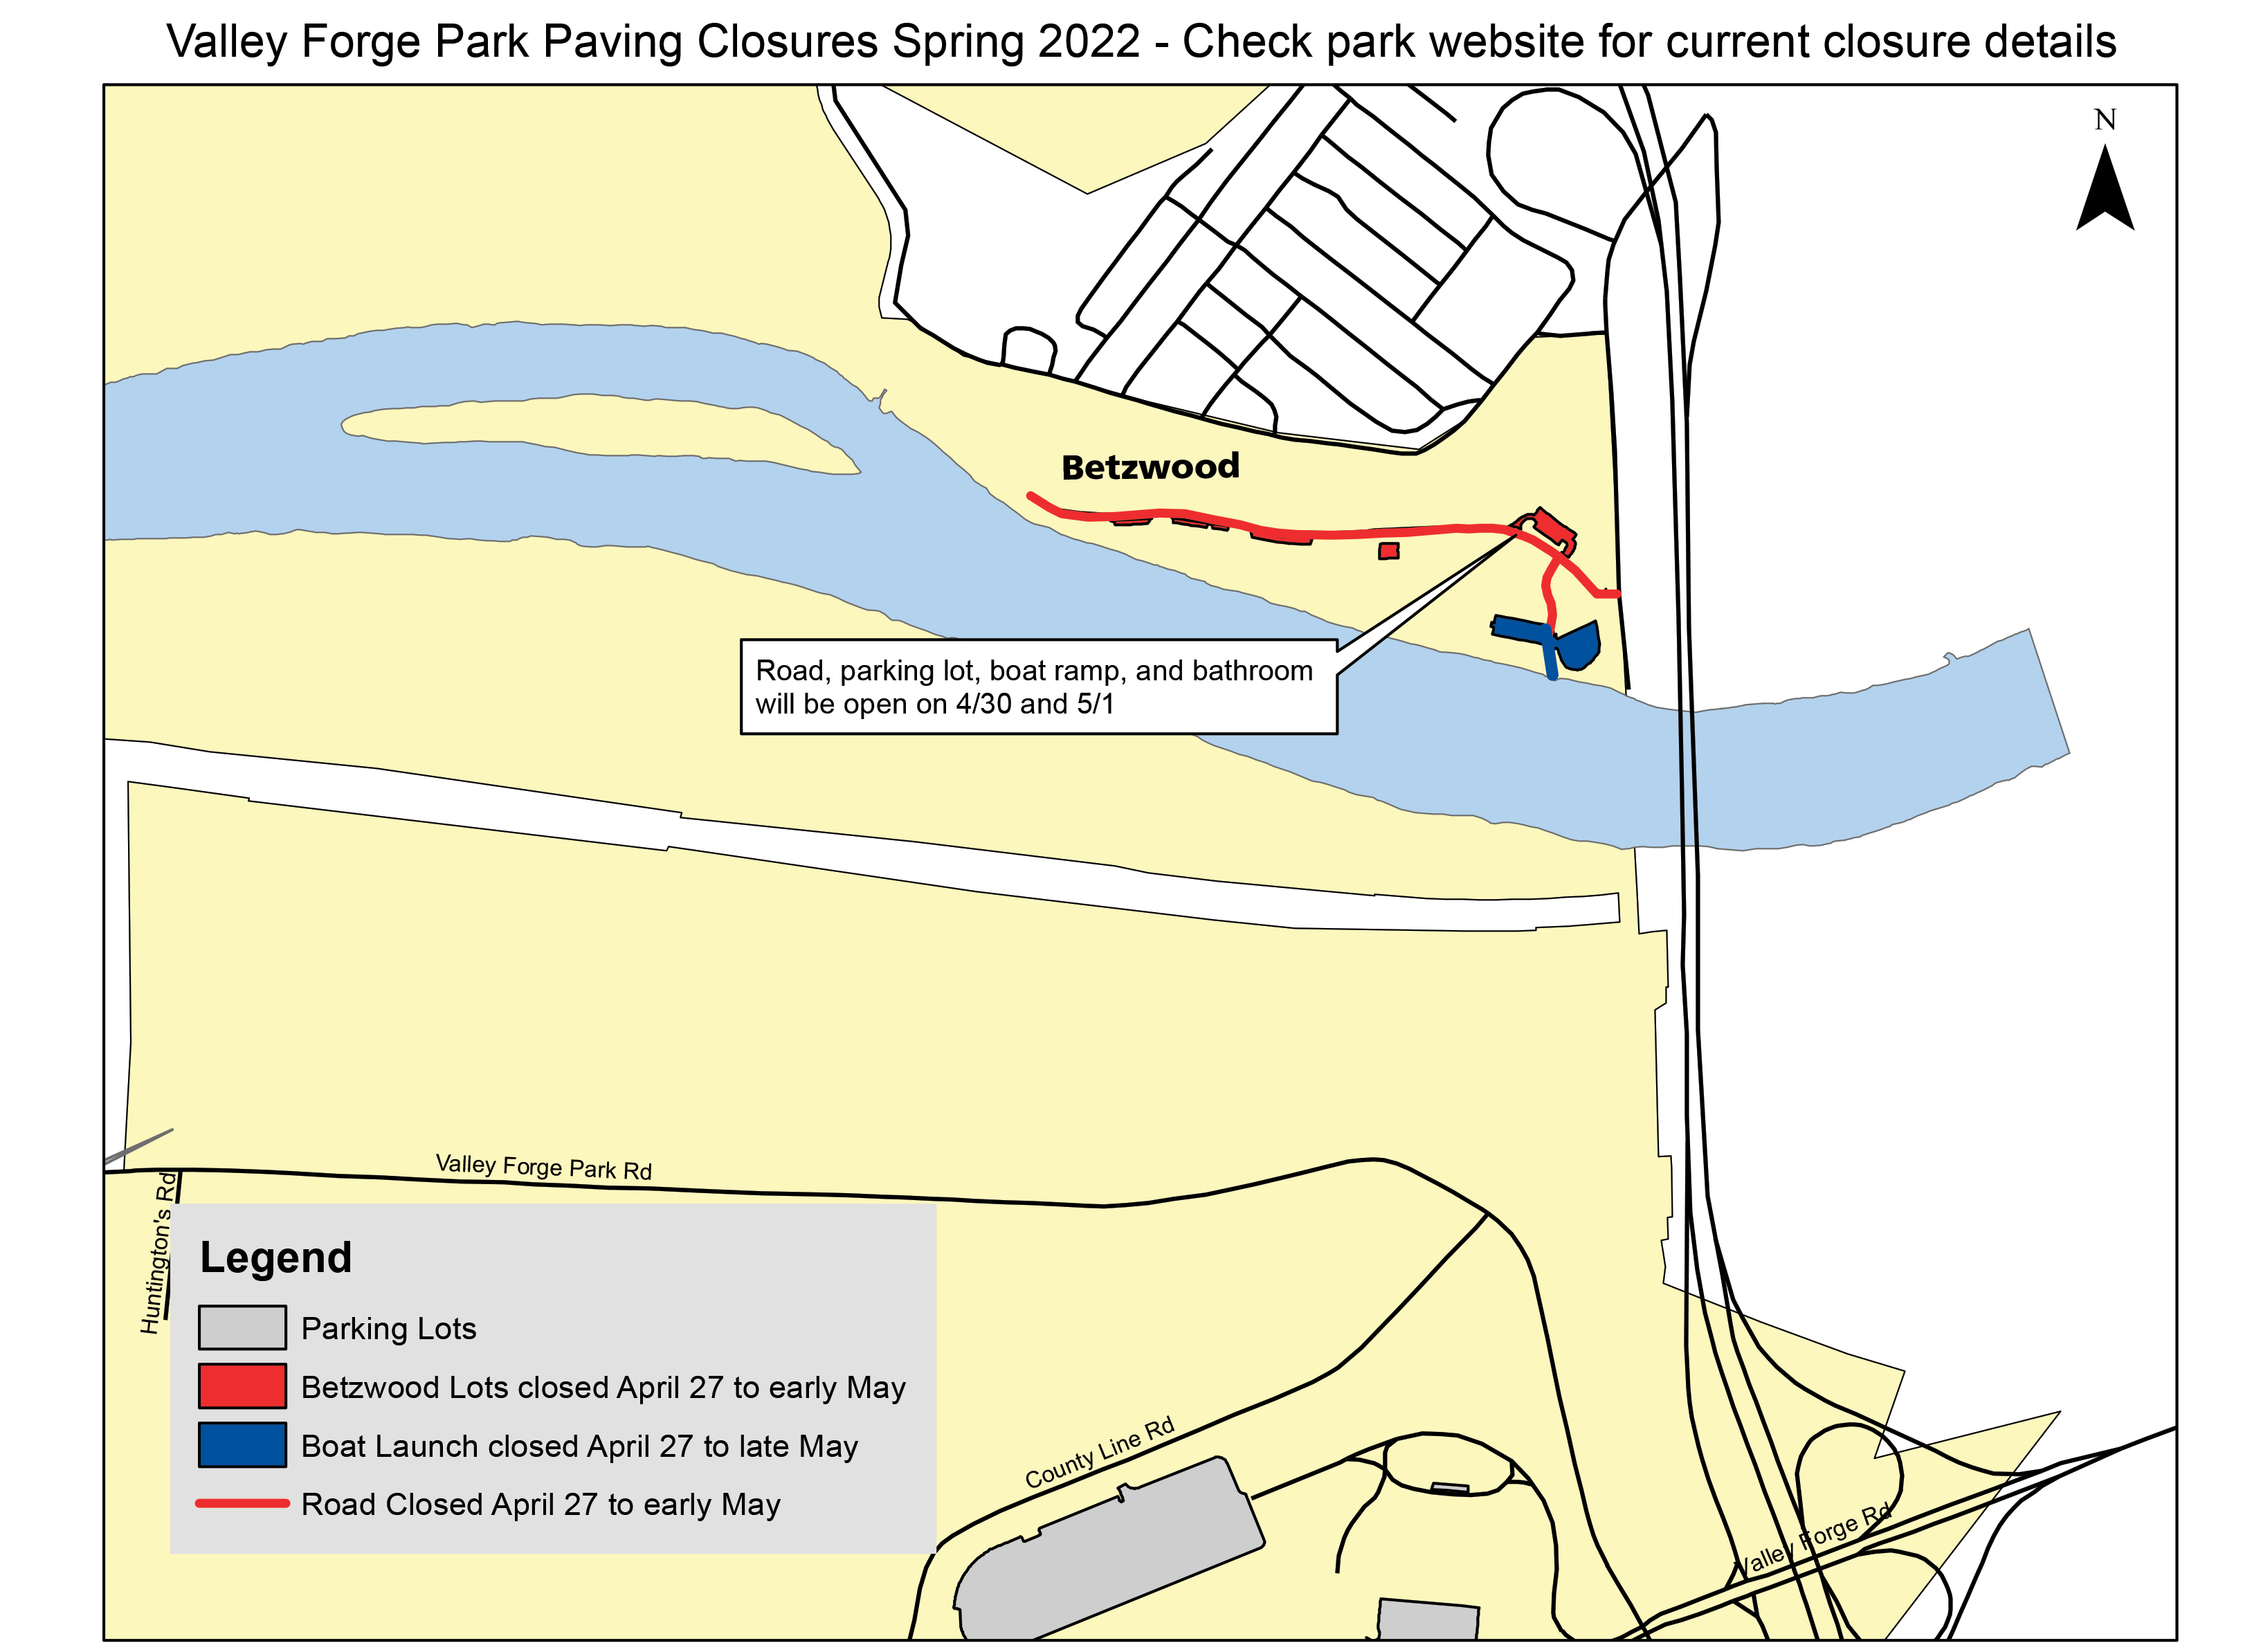 graphic, map of closed road, parking lot, and boat ramp at Betzwood